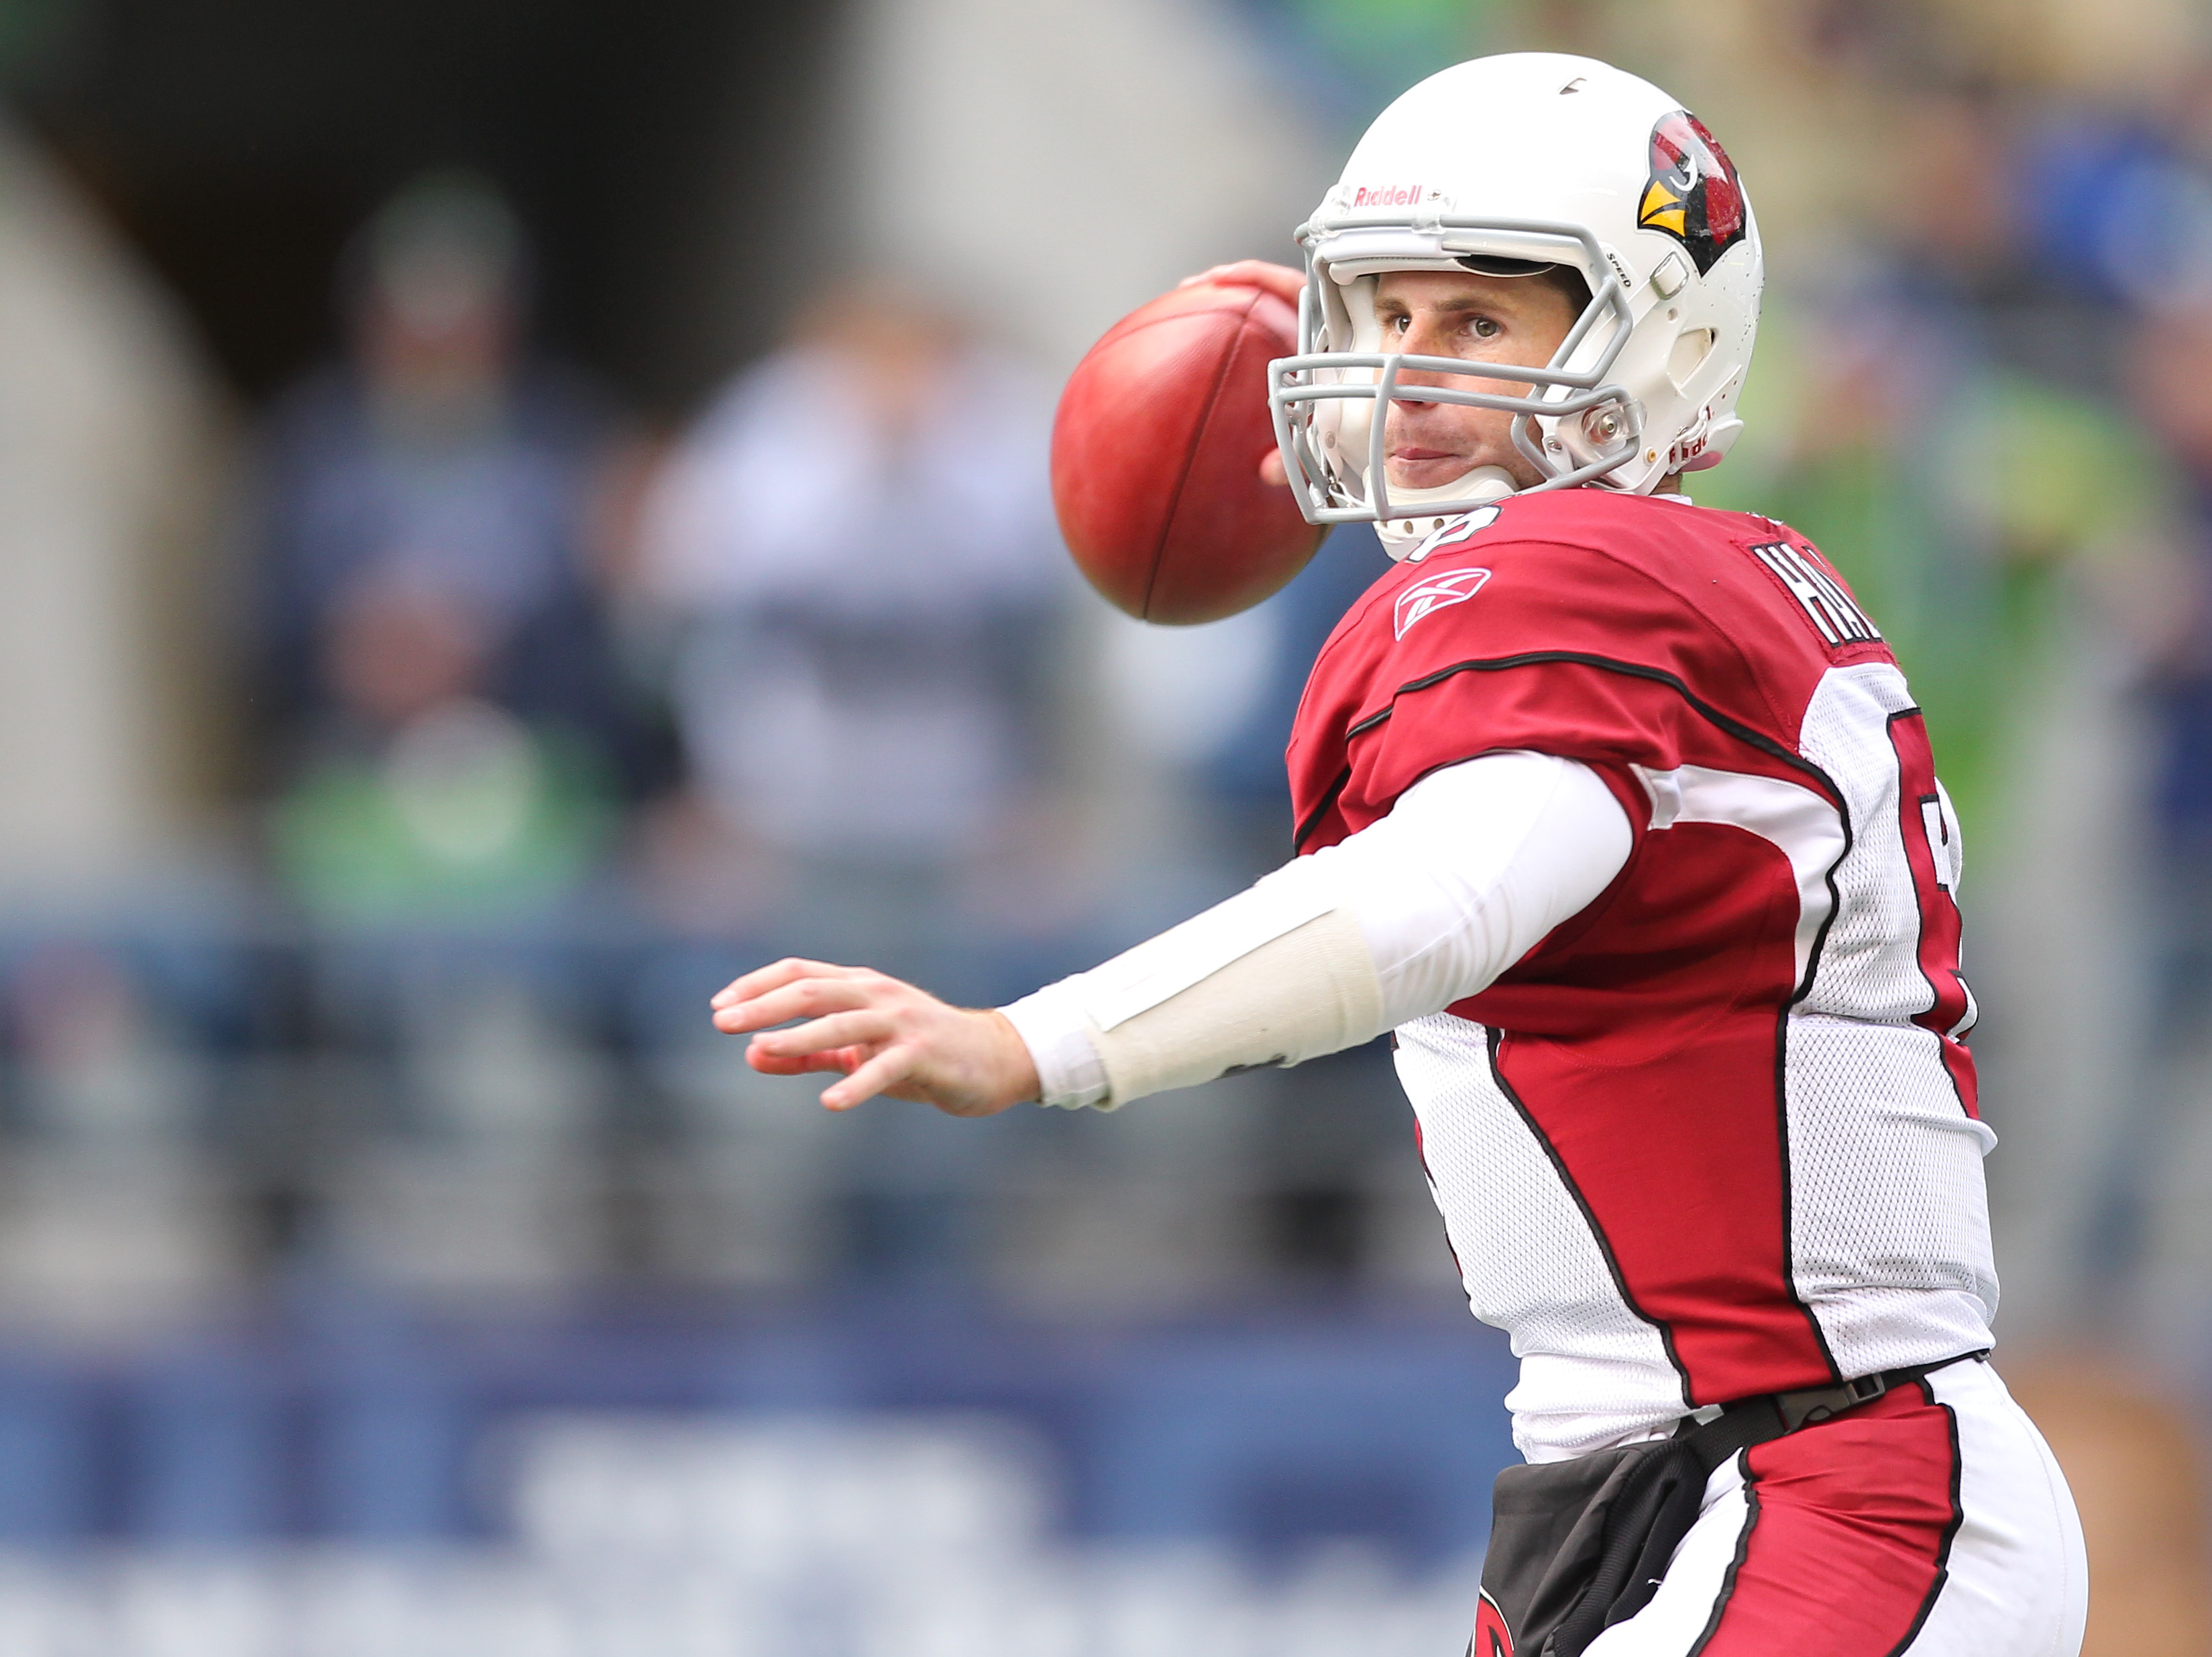 SEATTLE - OCTOBER 24:  Quarterback Max Hall #6 of the Arizona Cardinals passes against the Seattle Seahawks at Qwest Field on October 24, 2010 in Seattle, Washington. (Photo by Otto Greule Jr/Getty Images)